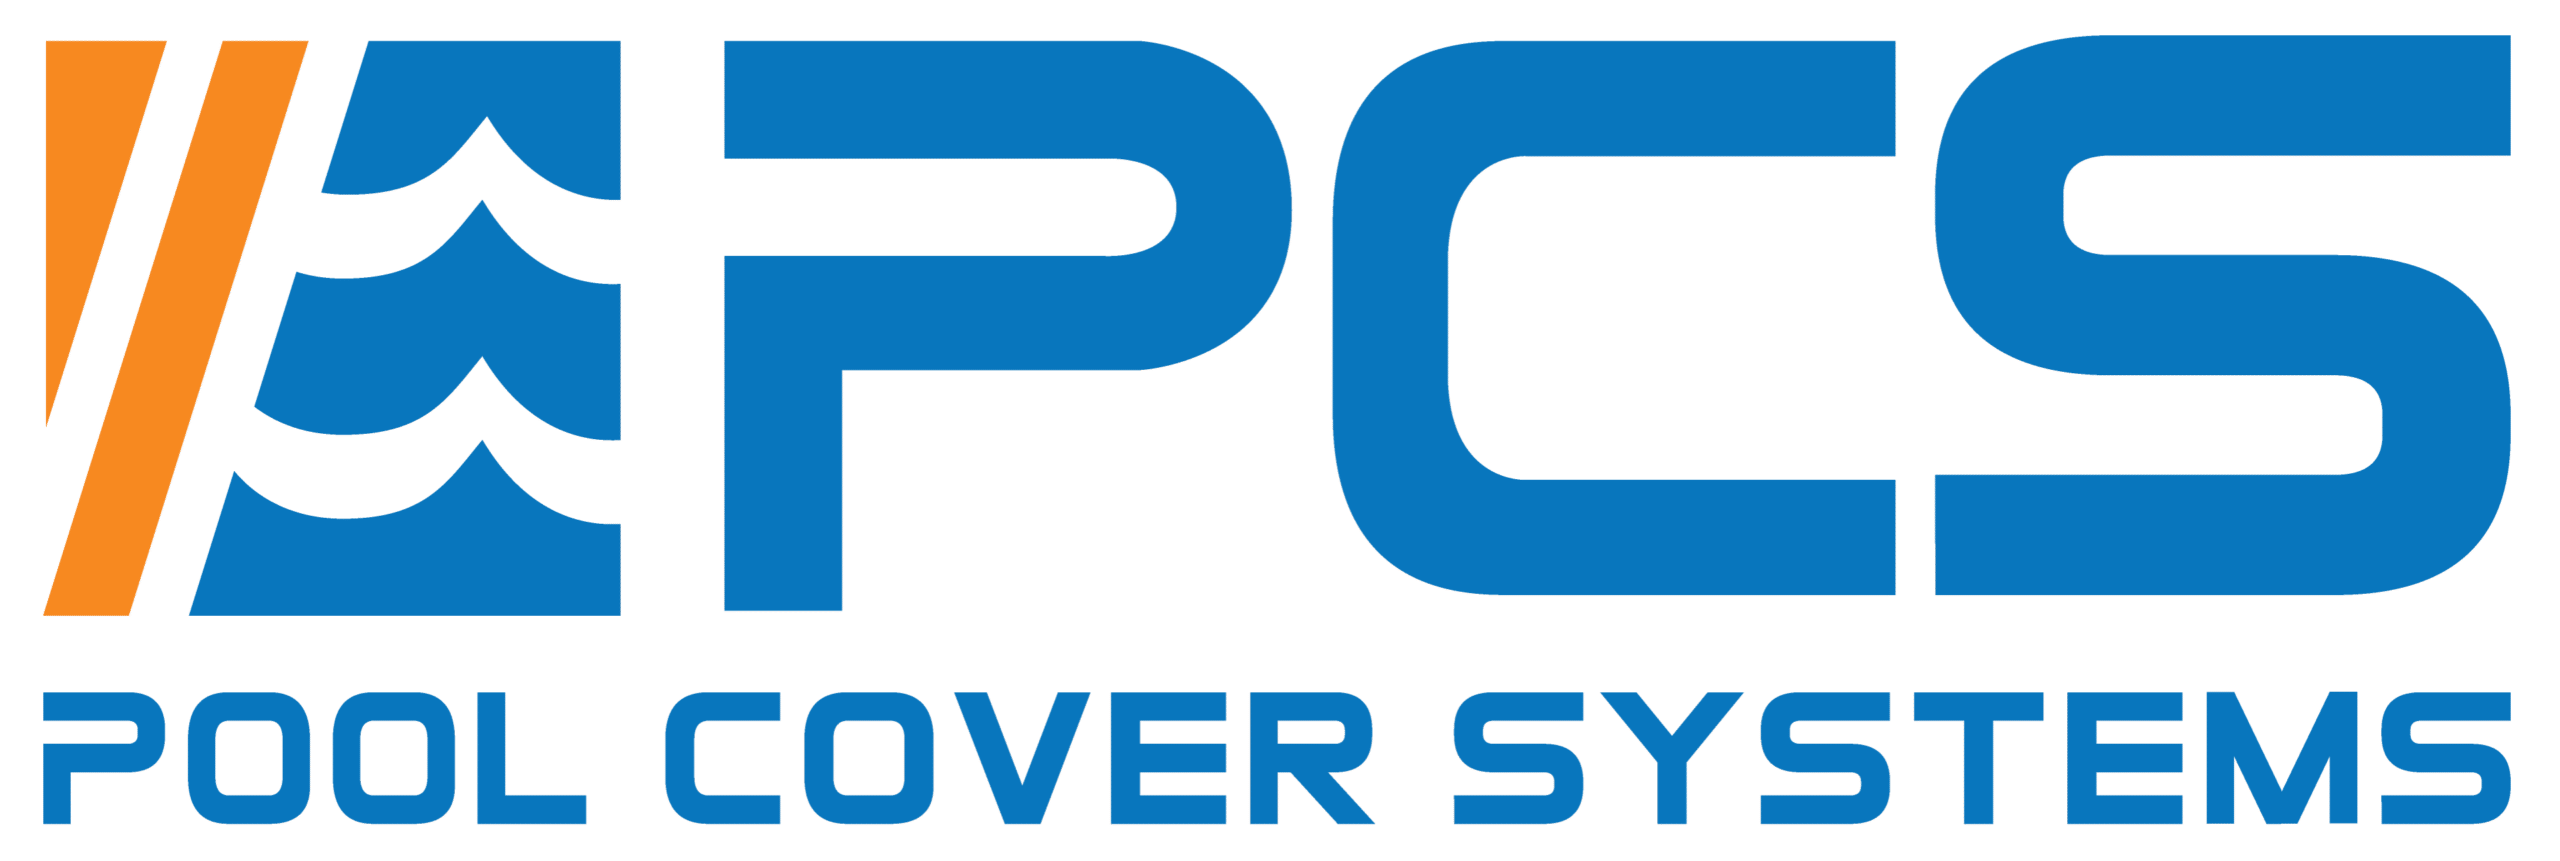 pool cover systems logo